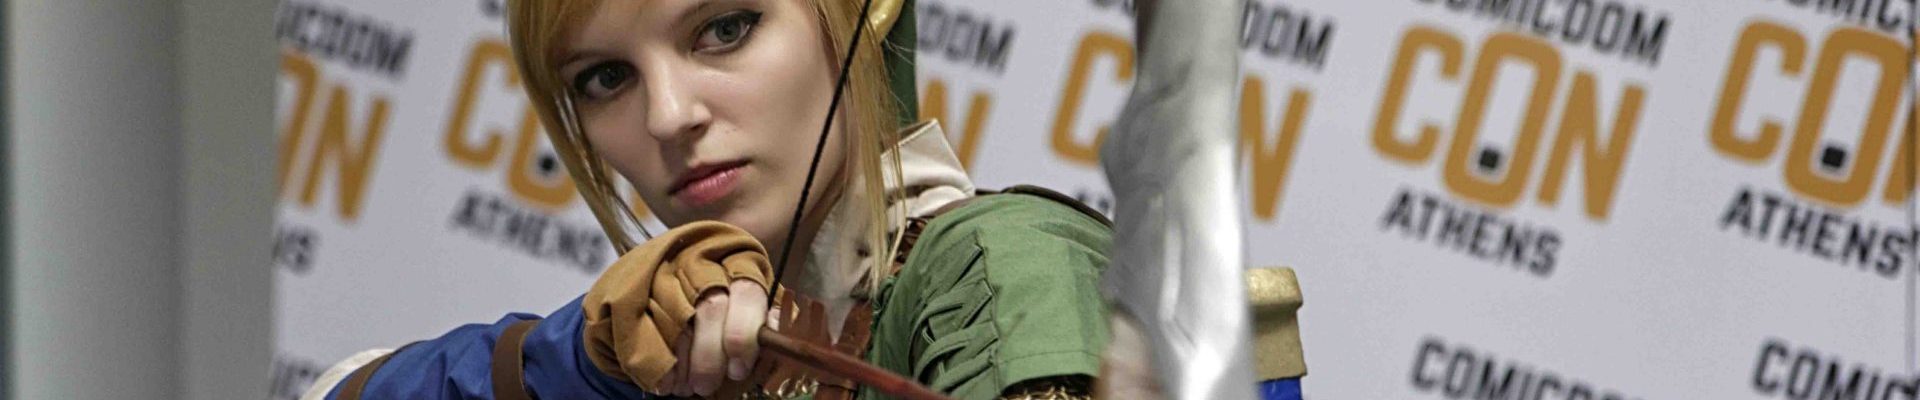 Comicdom Cosplay 2019 & Live Streaming Tickets